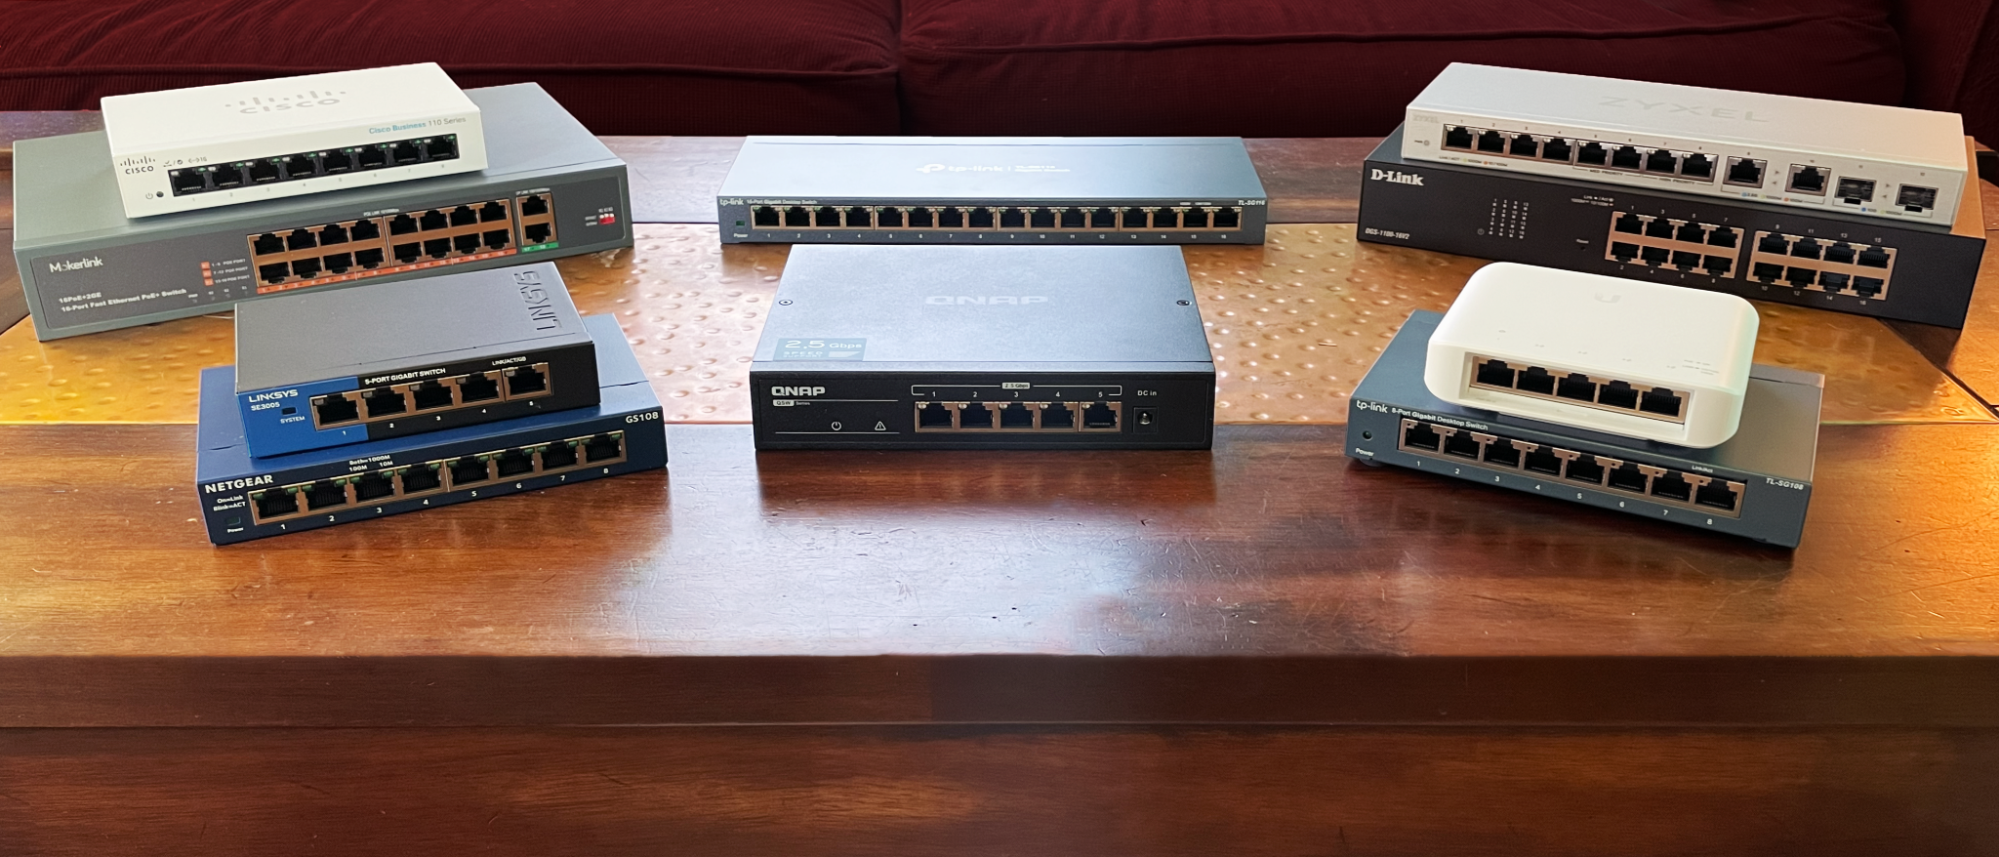 Unmanaged Switch for Business - Gigabit Switches - TP-Link